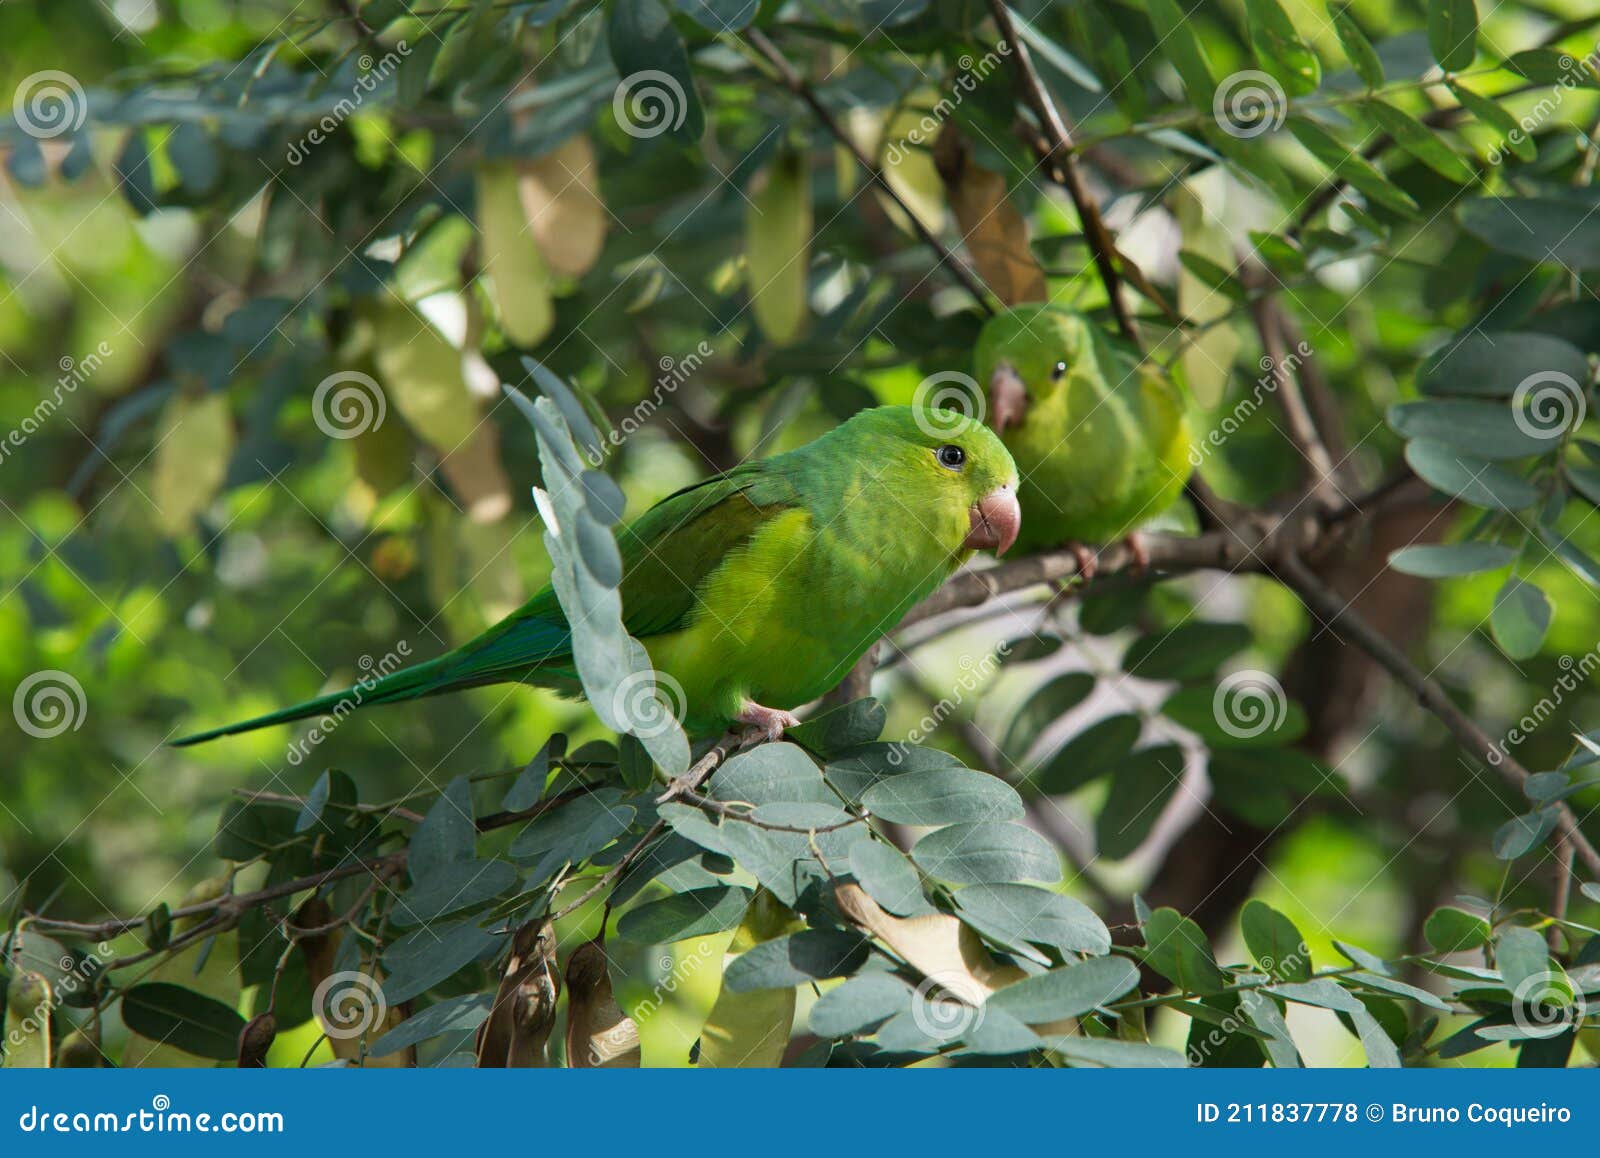 perequito perched on the tree branch. pÃÂ¡ssaro, ave, bird, maritaca, mbai`ta, periquito, ÃÂ¡rvore, livre, free, wild life